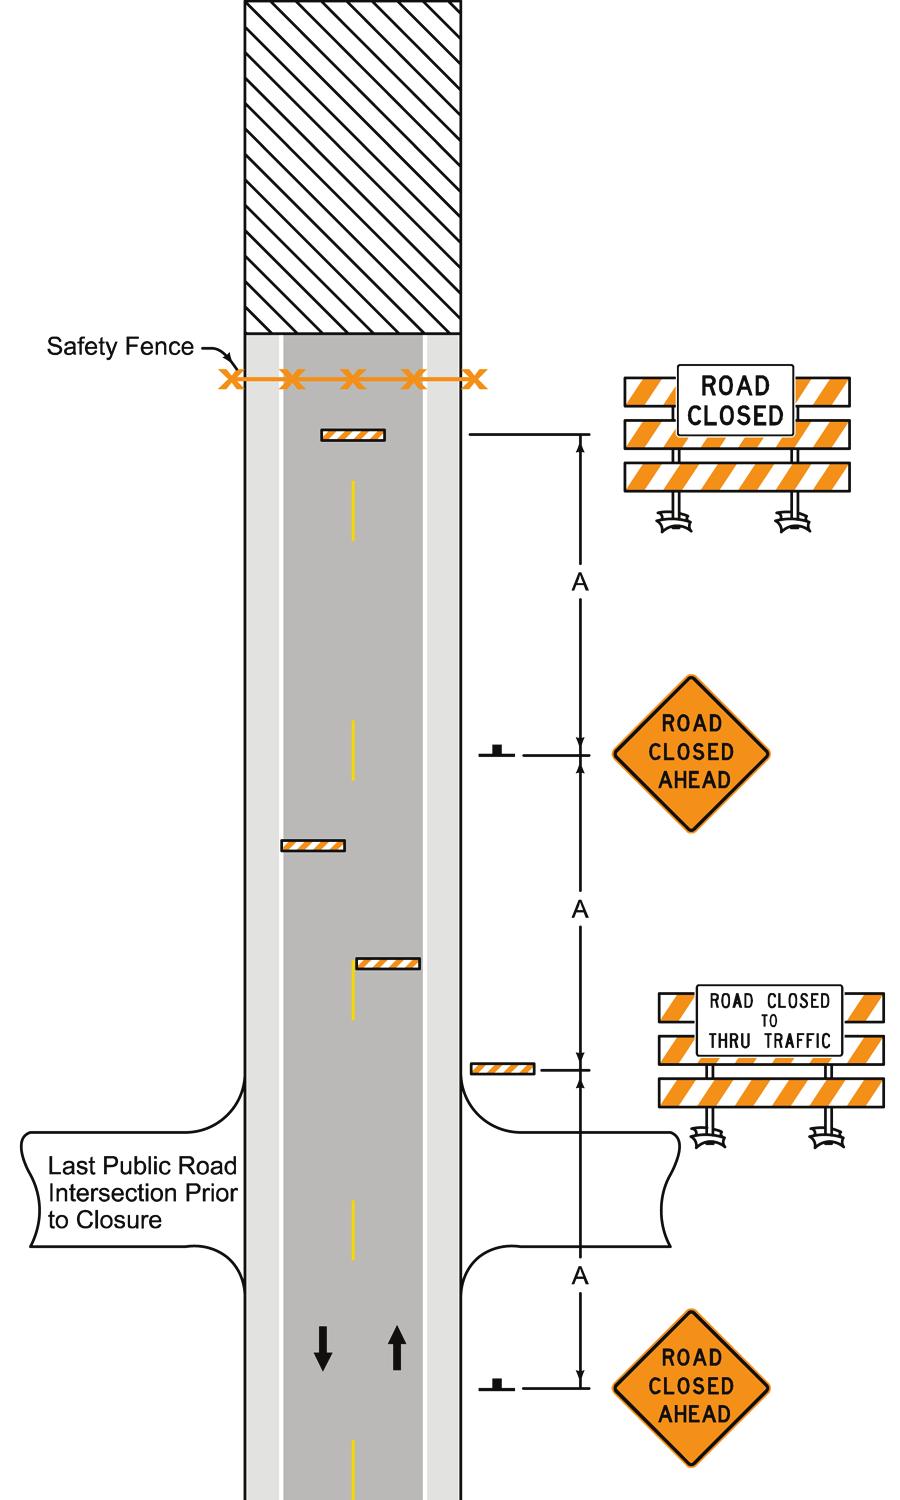 12. STREET OR ROAD CLOSURE When distance A is less than 500 feet, the barricade should be placed in the middle of the traffic lane approaching the work area.